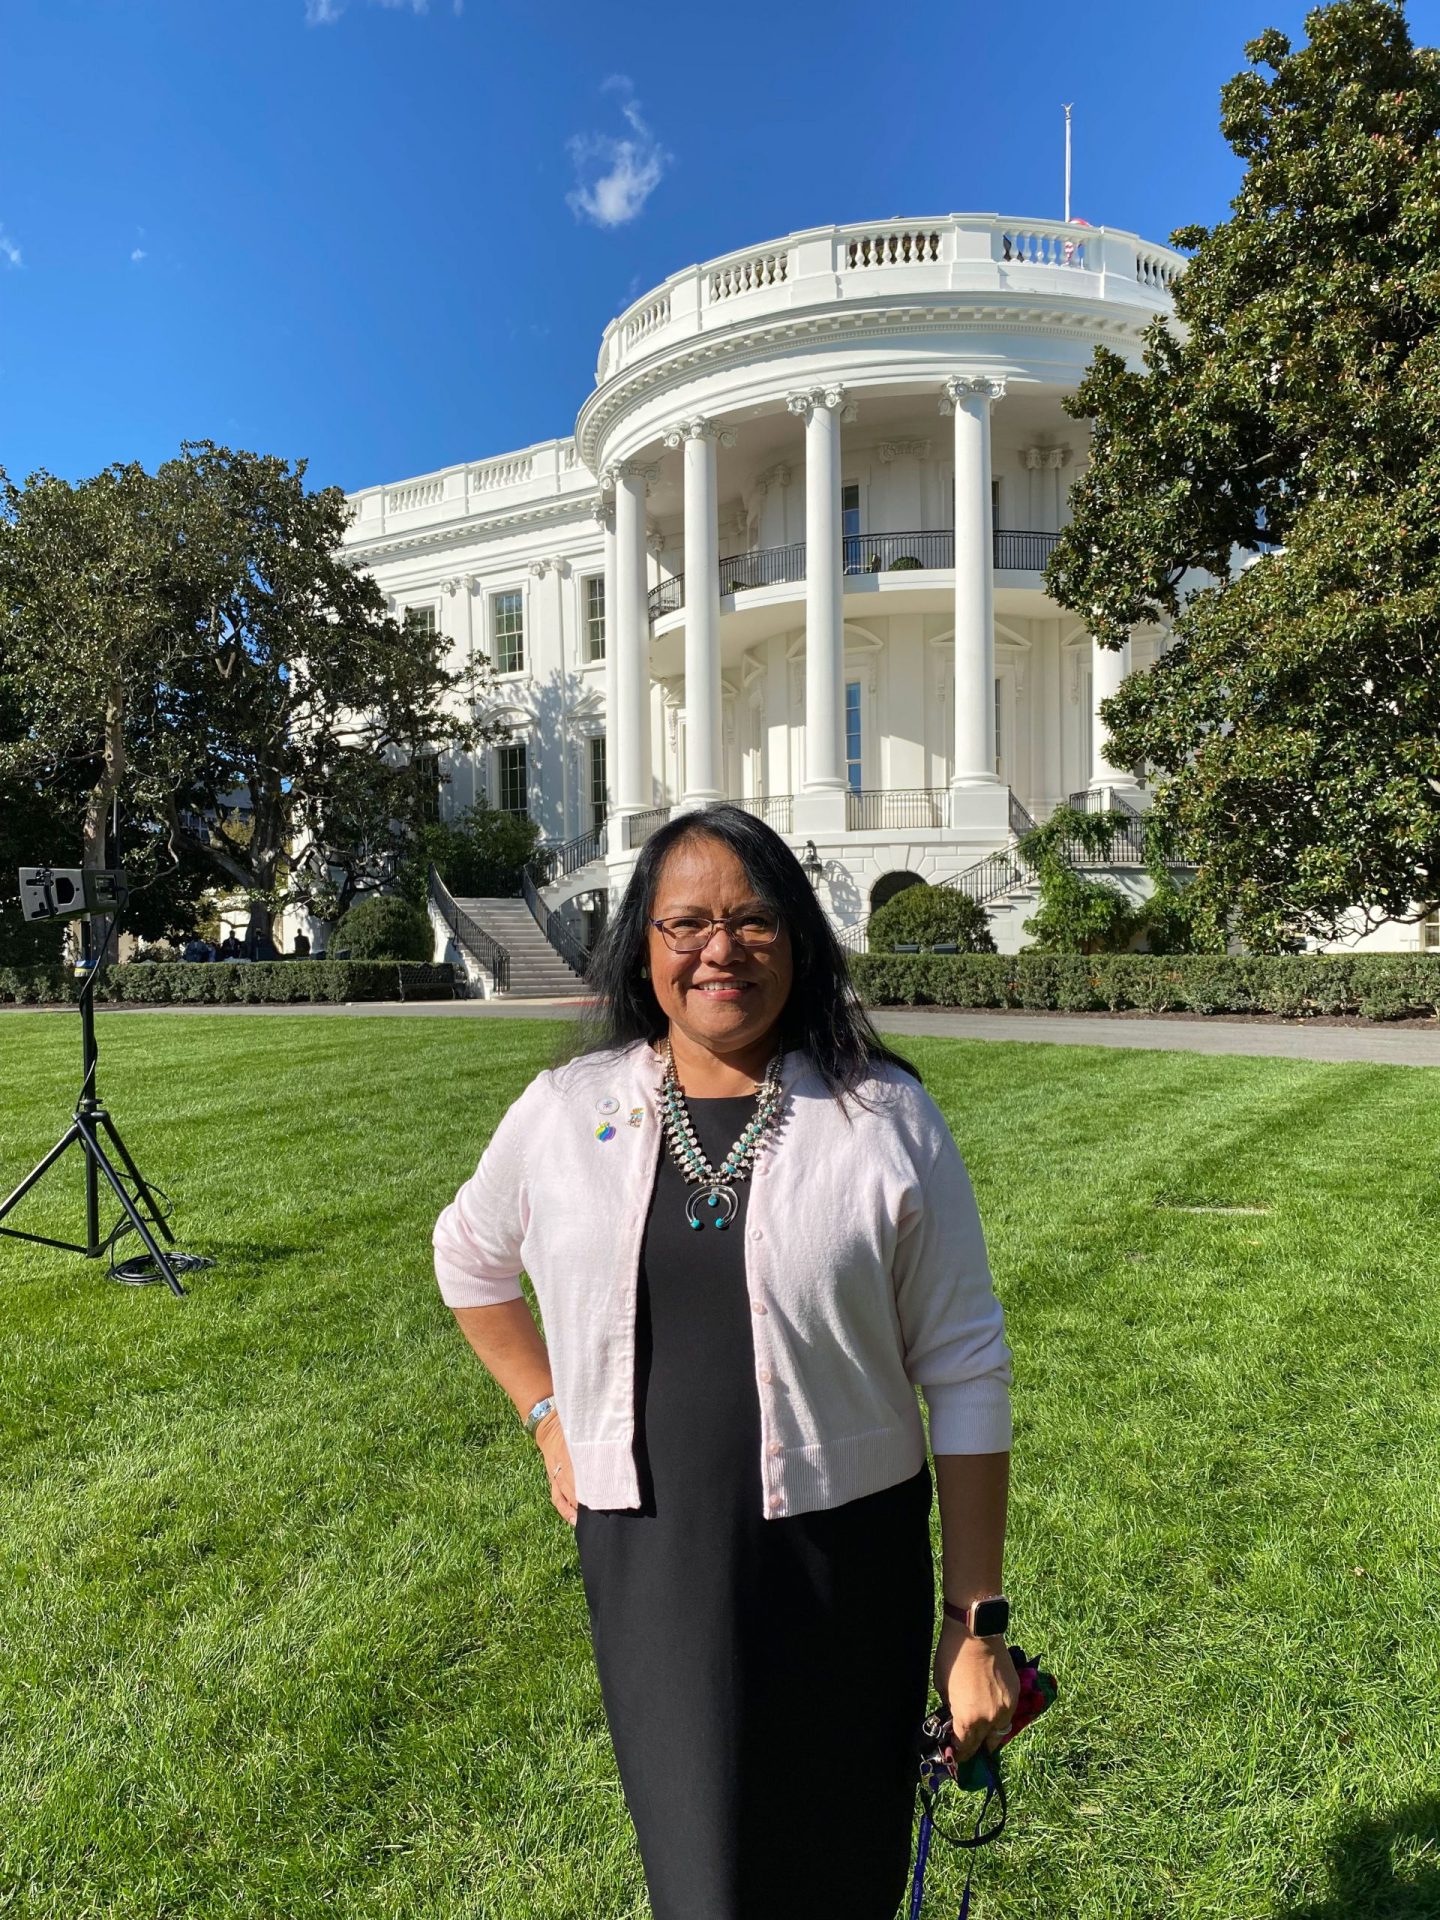 2020 Arizona Teacher of the Year Recognized at White House